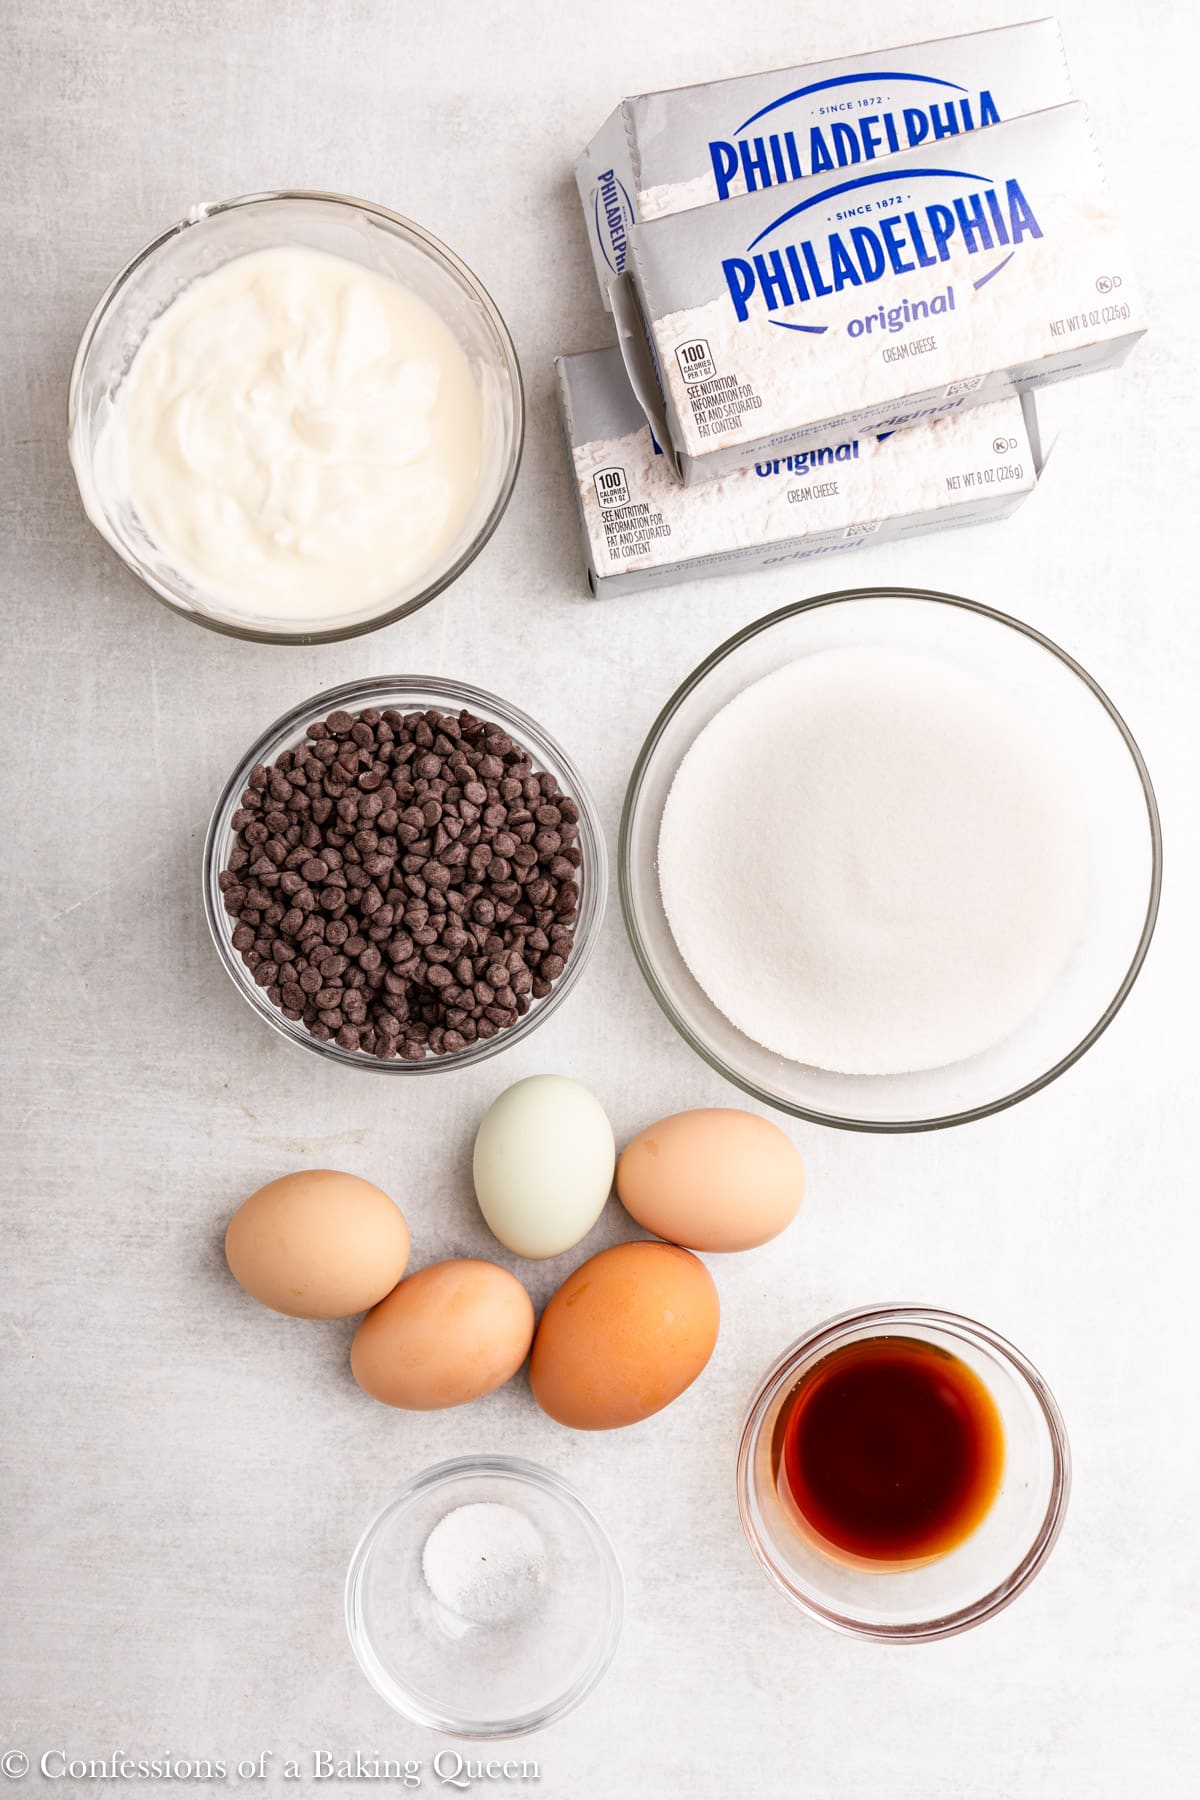 ingredients for chocolate chip cheesecake in small glass bowls on a light grey surface.